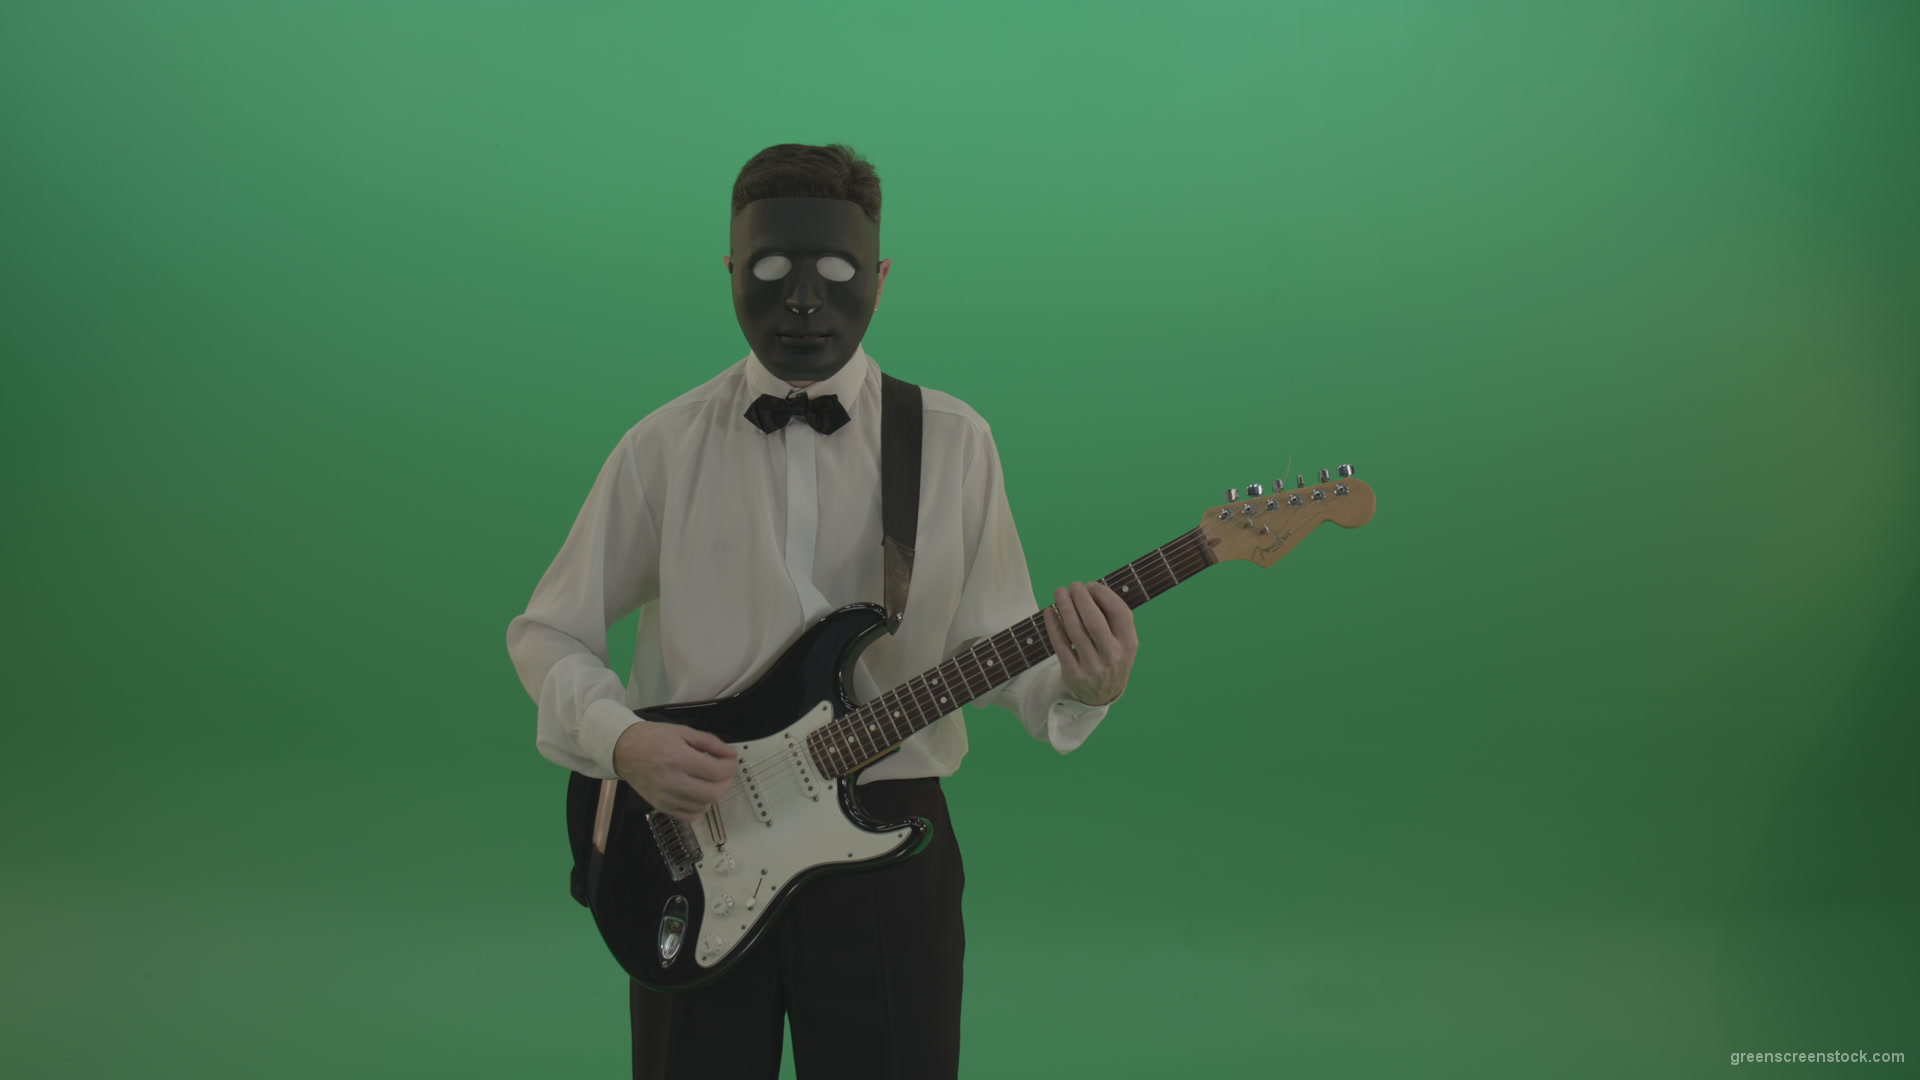 Horror-classic-guitarist-man-in-black-mask-and-white-shirt-play-guitar-on-green-screen_006 Green Screen Stock